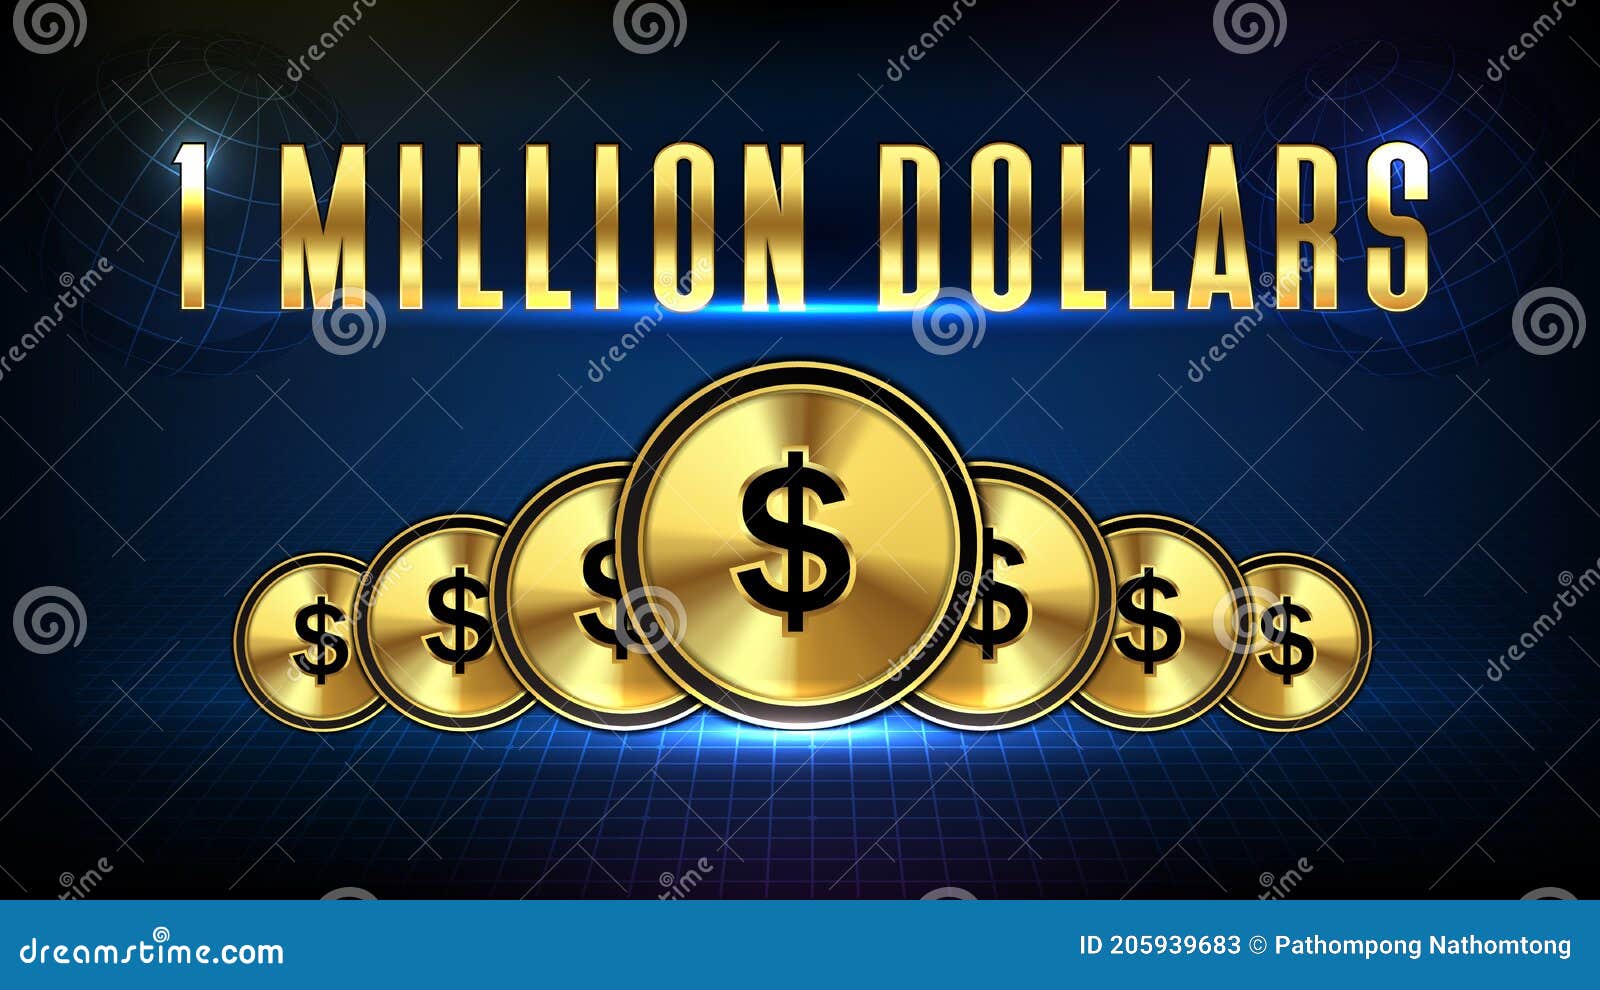 background of stock market 1 million dollars and golden dollar coin